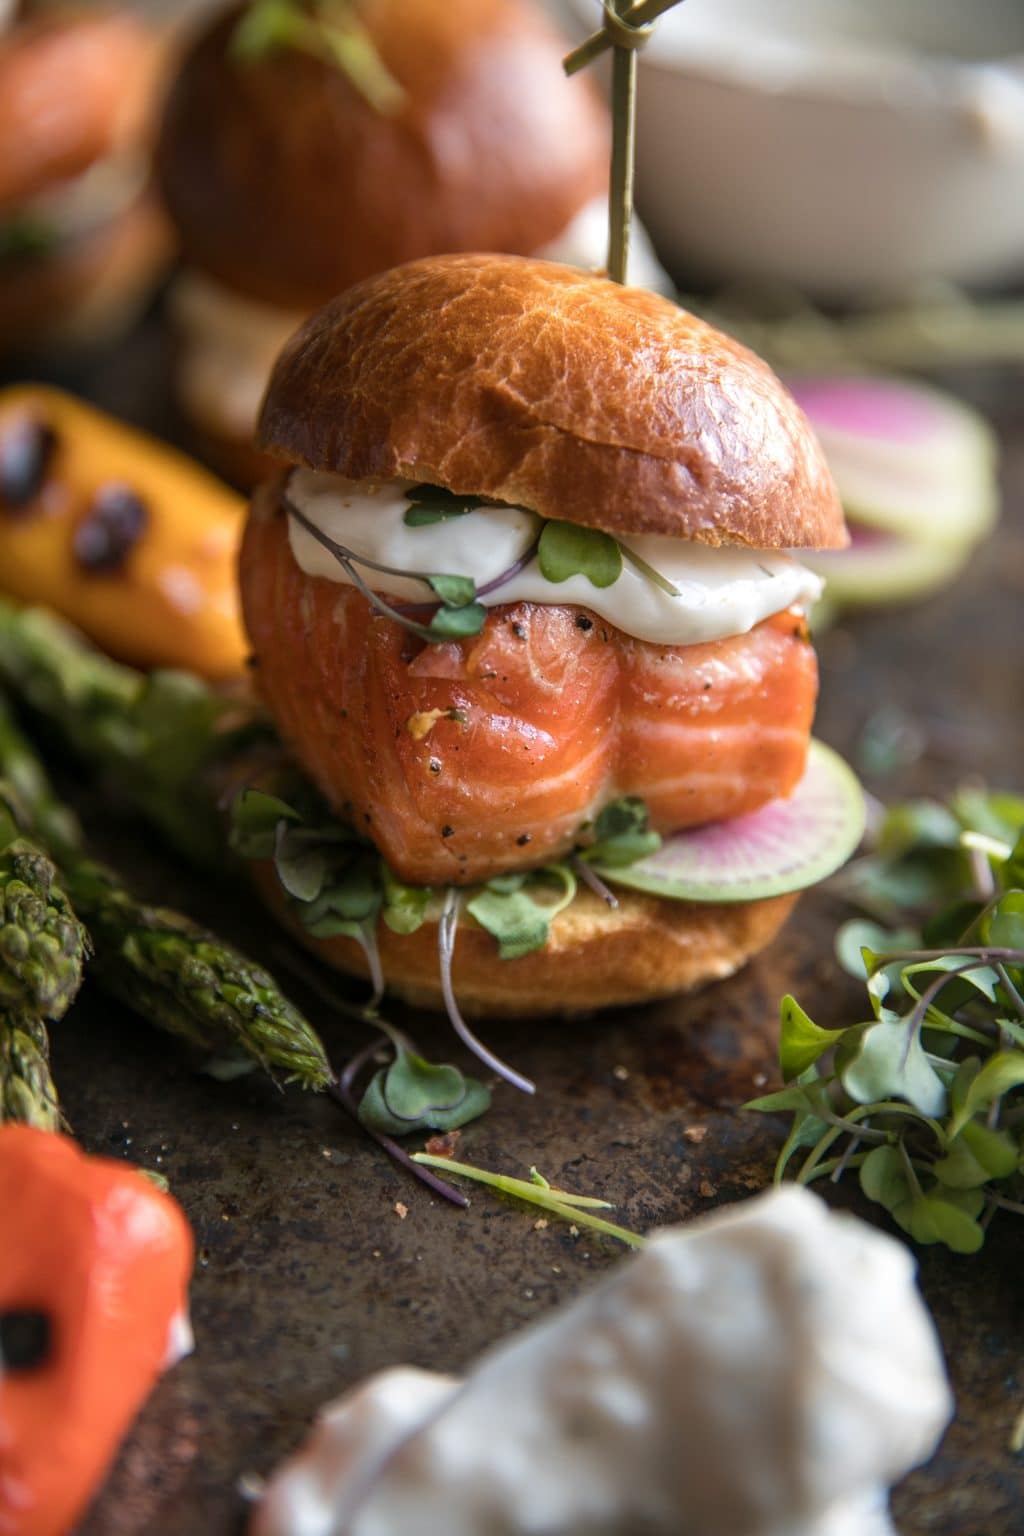 Grilled Salmon Slider topped with Garlic Lemon Aioli and microgreens on a toasted brioche bun